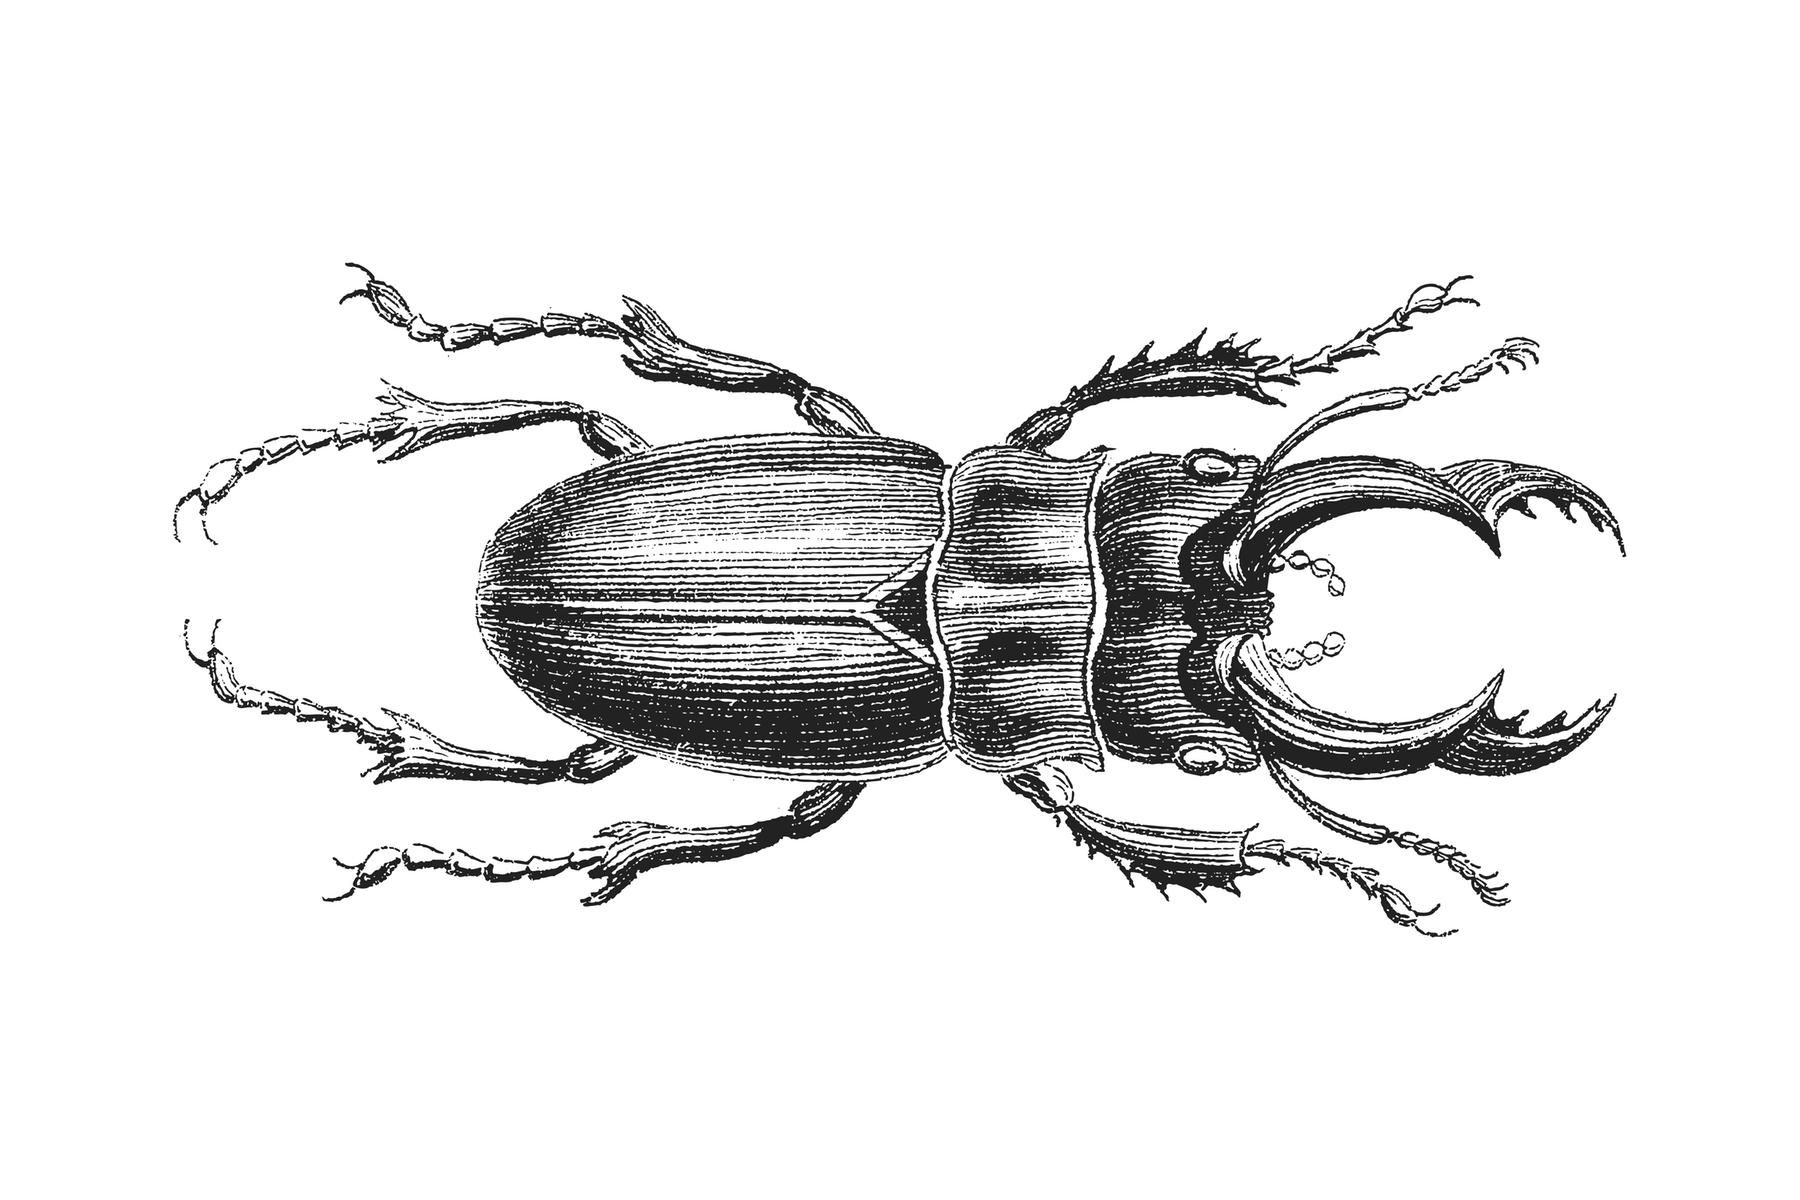 Vintage science drawing of stag beetle in black and white nostalgic and uni...